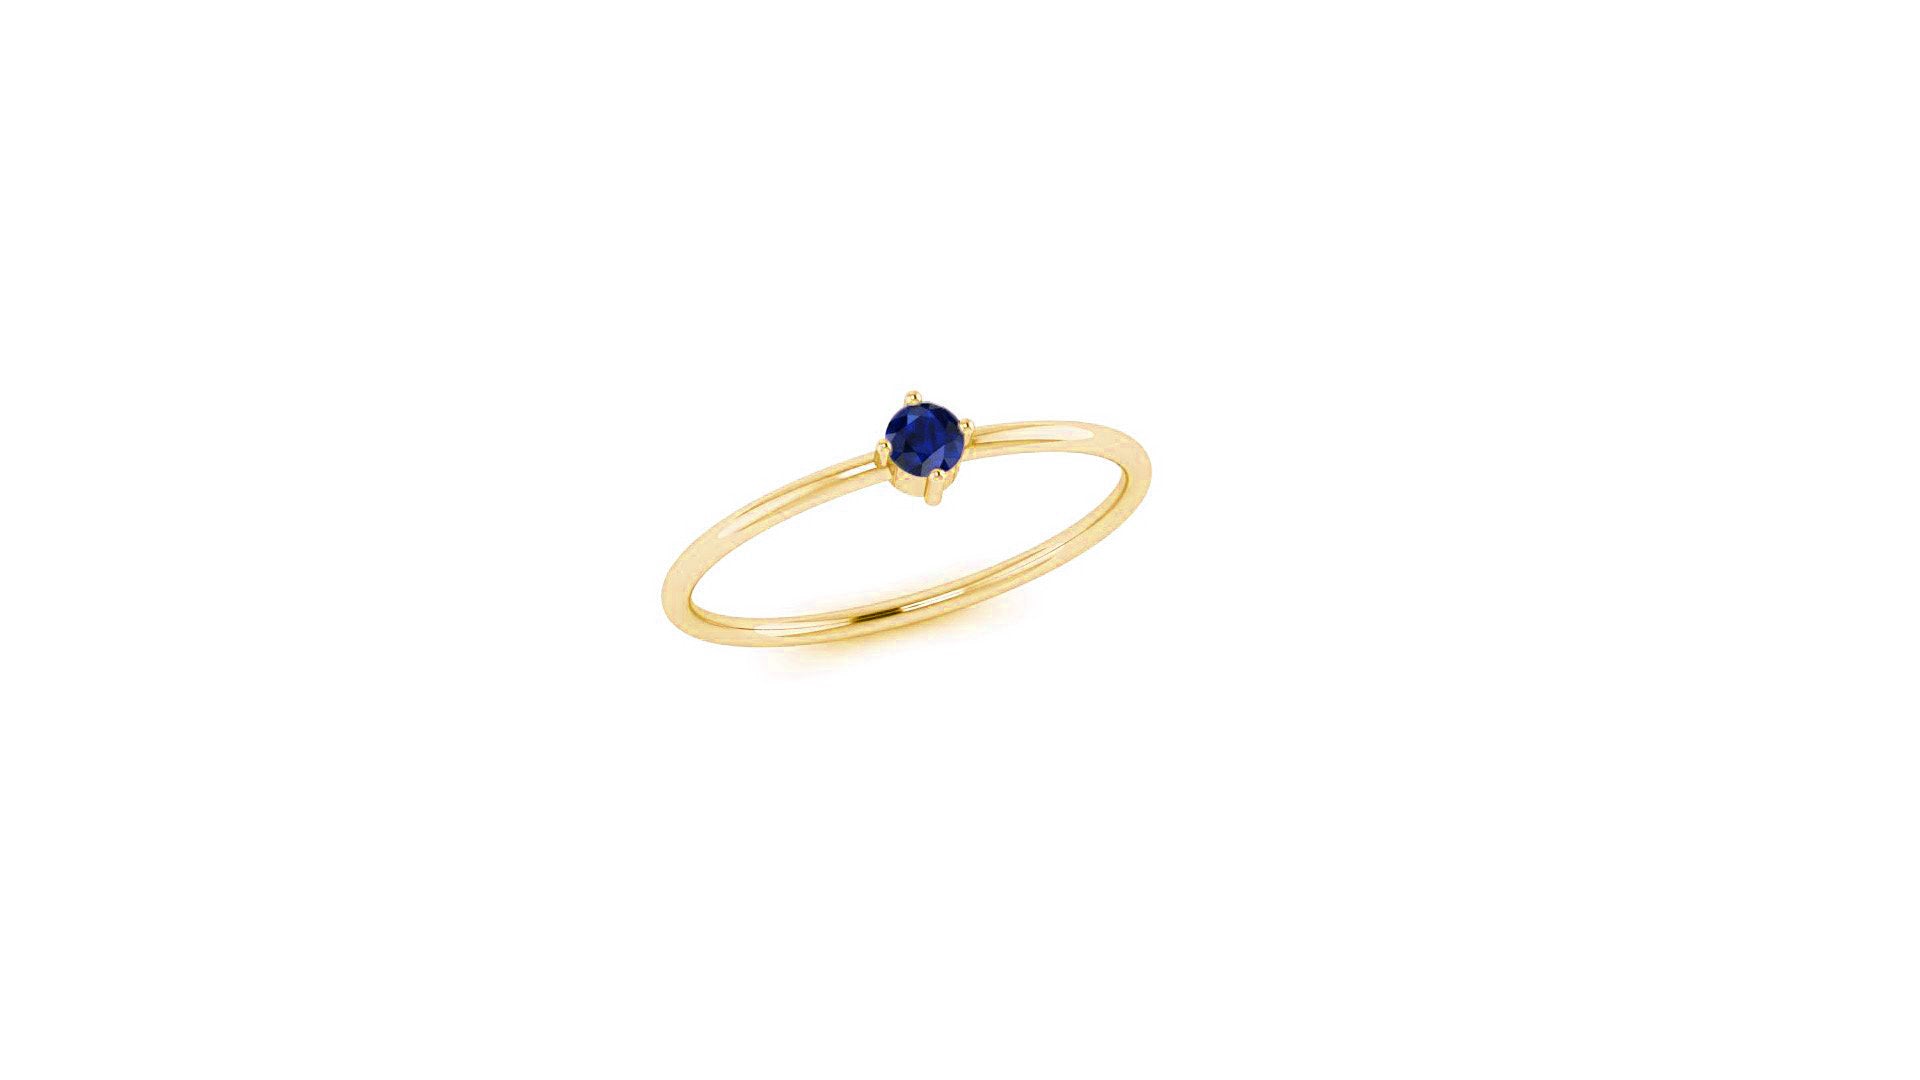 Solo Blue Sapphire Ring in 14kt Gold